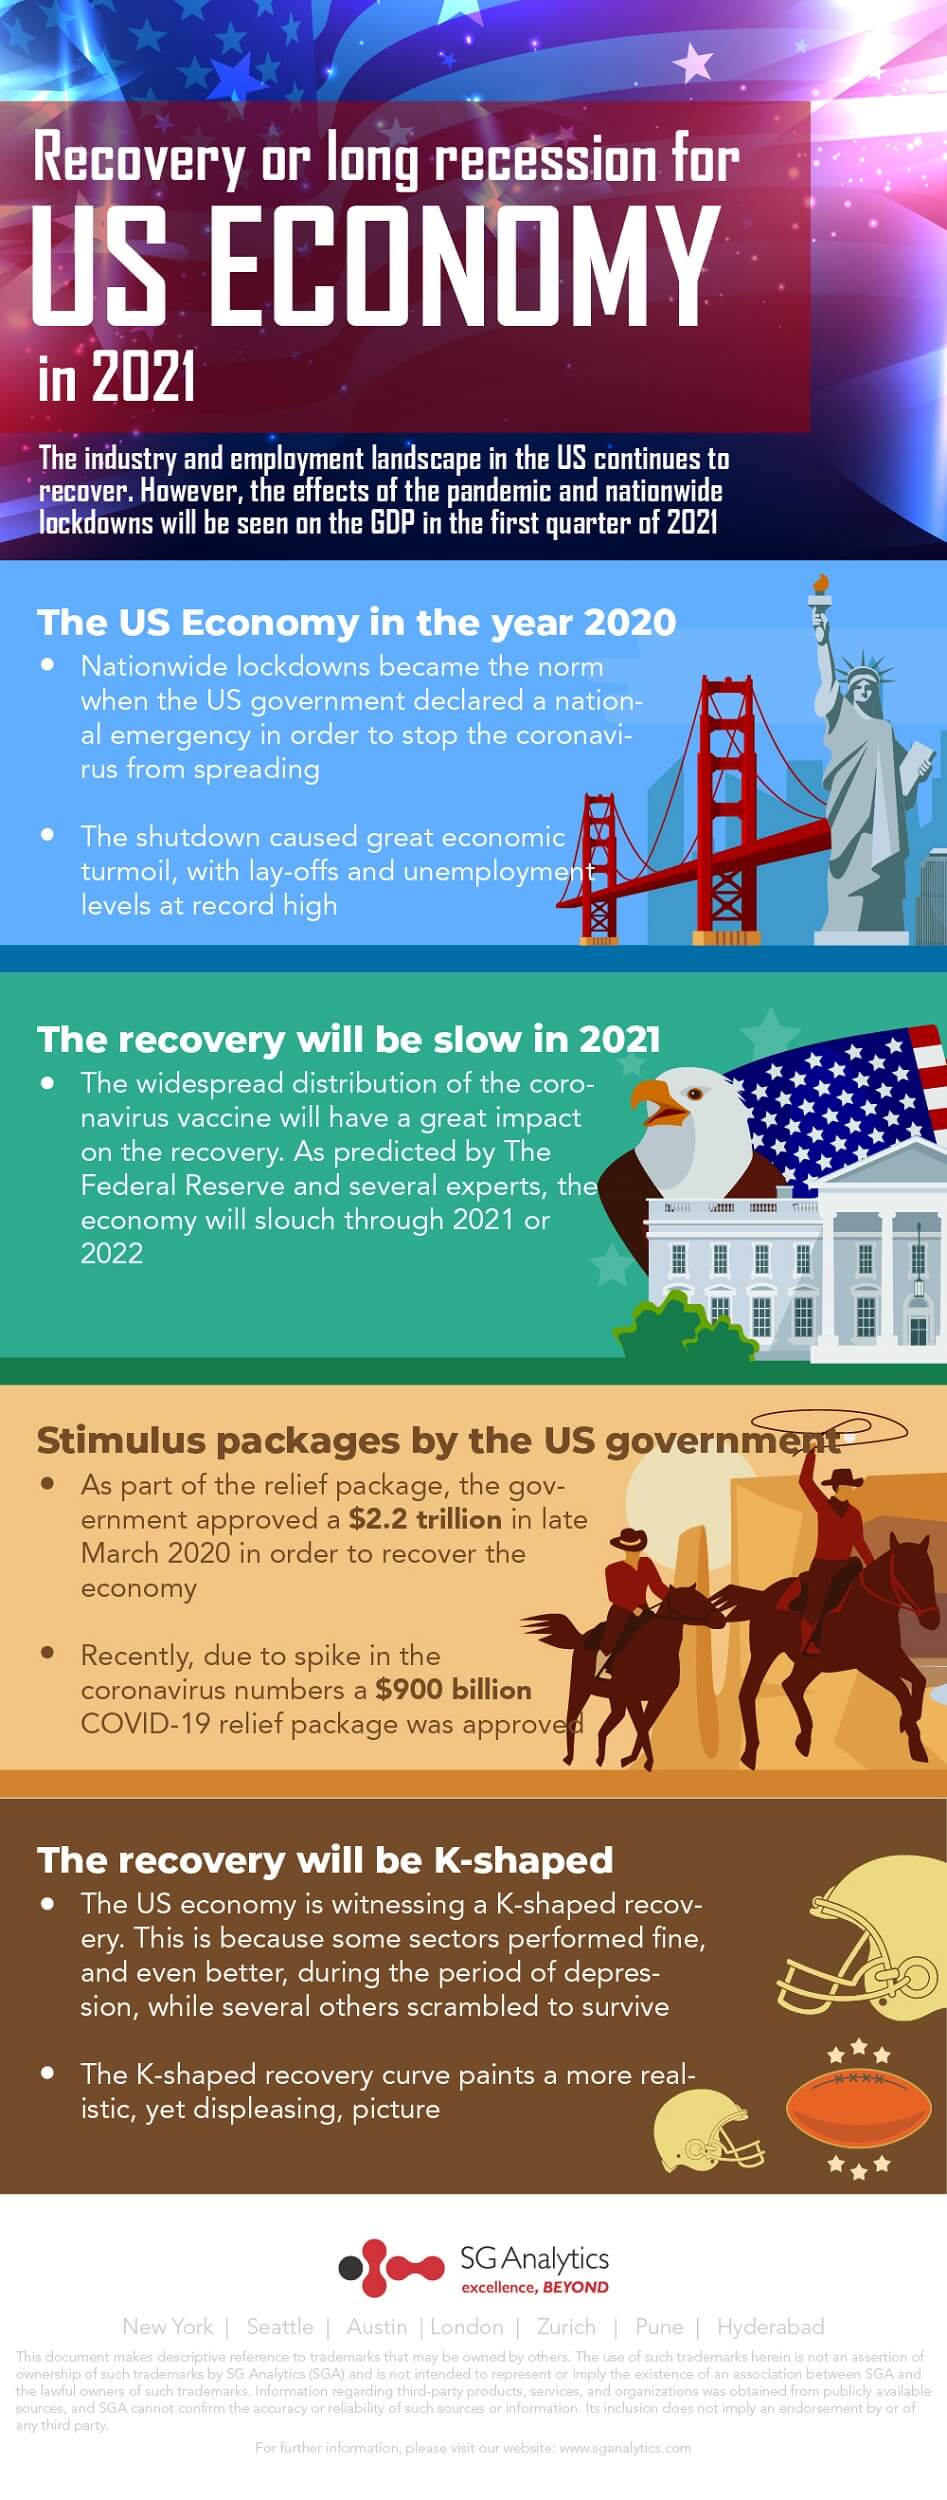 Recovery or long recession for US Economy in 2021